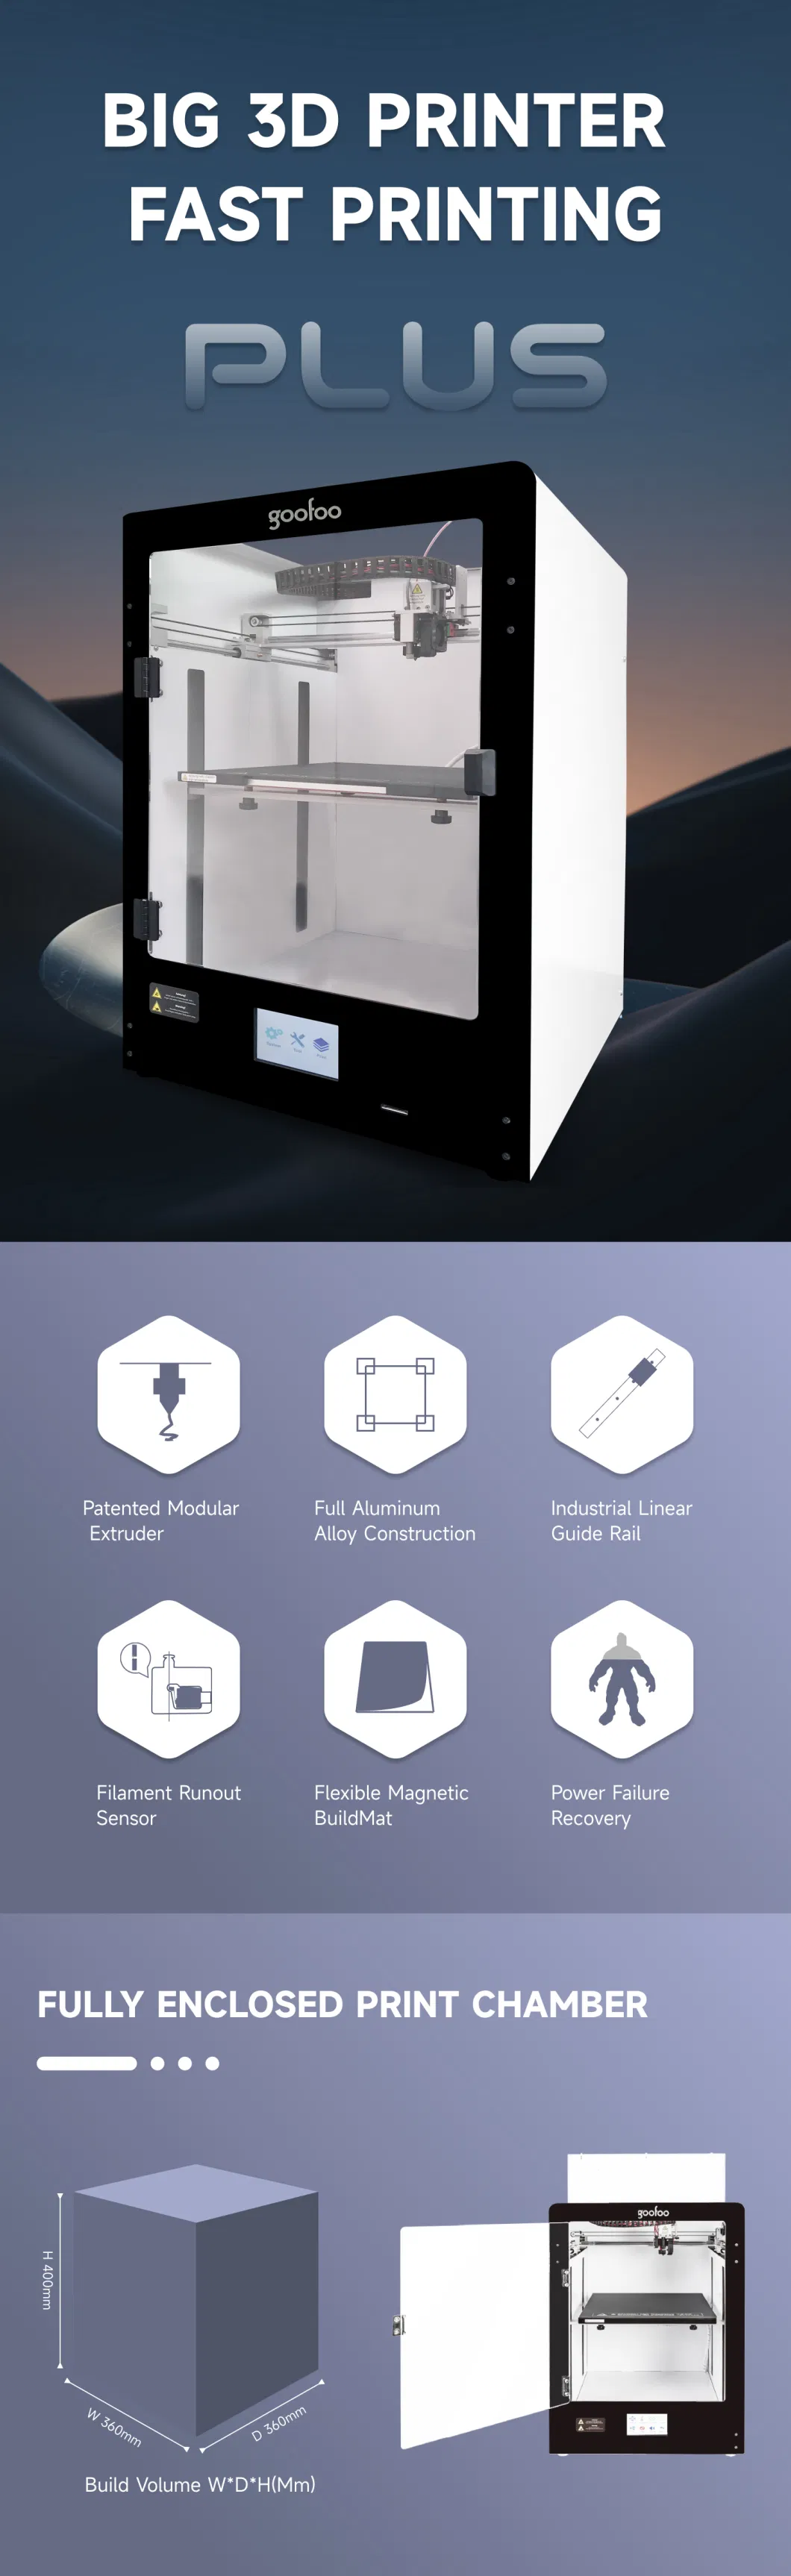 Professional 3D Printer with WiFi Function, High Precision Printing with Engineering Filament